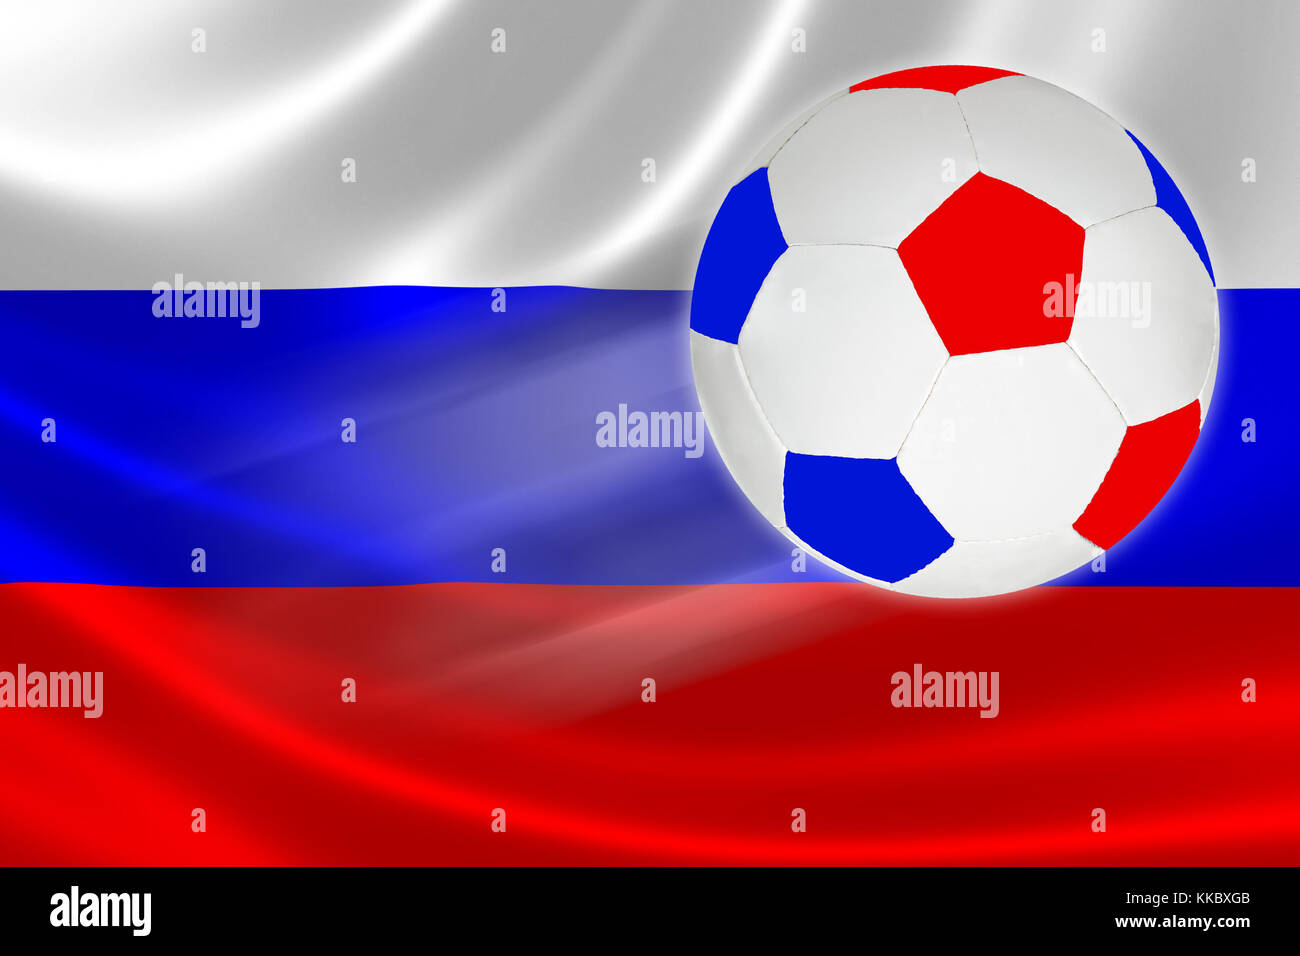 Soccer ball in Russian flag colors flies across the flag of Russia, where soccer is a national passion. Stock Photo